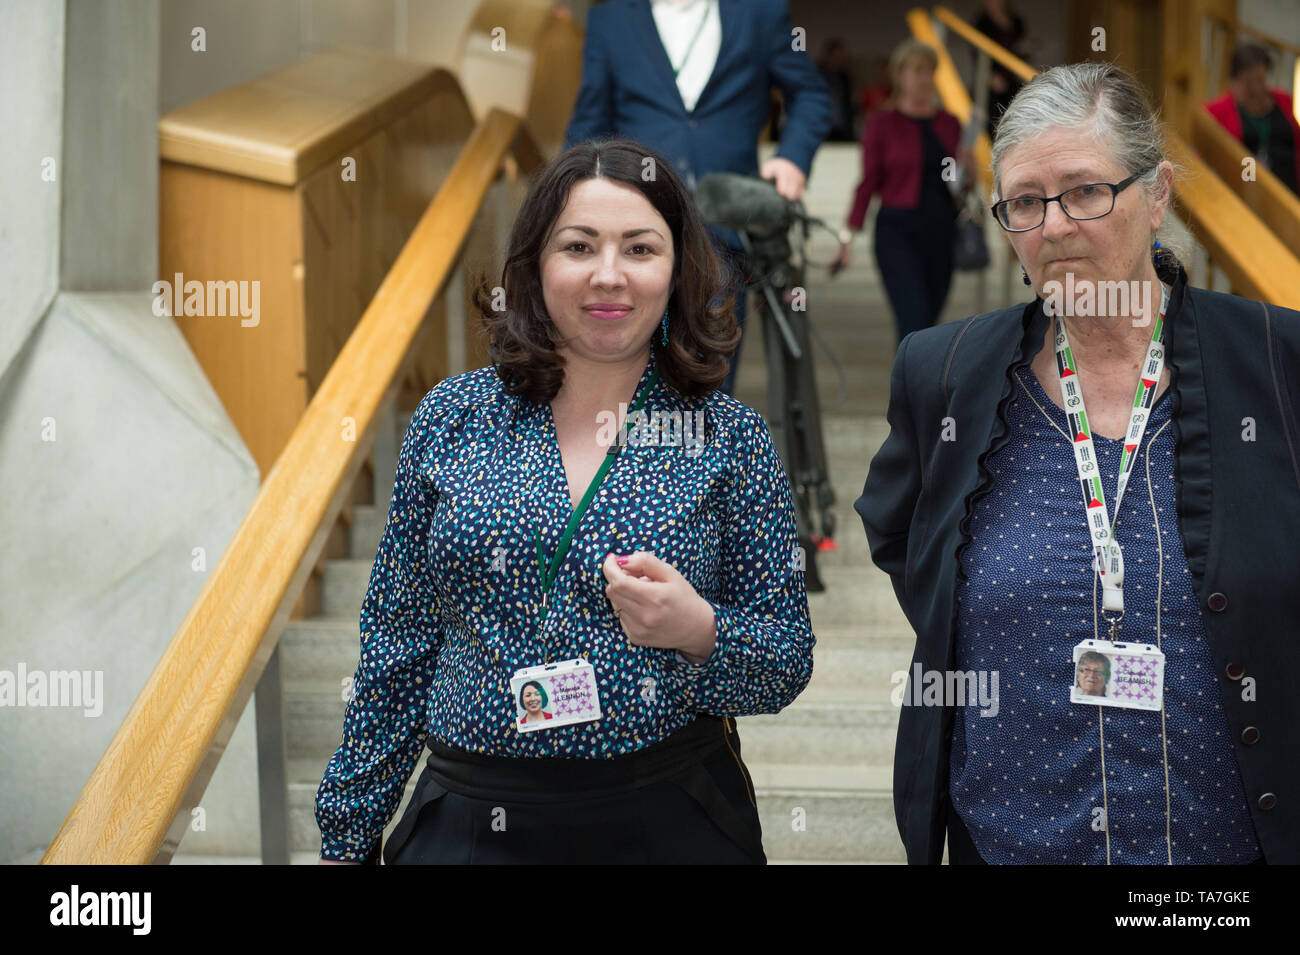 Edinburgh, UK. 22 May 2019.  PICTURED: (left-right) Monica Lennon MSP; Claudia Beamish MSP.  The end of First Ministers Questions session at the Scottish Parliament in Holyrood in Edinburgh. After the chamber has emptied, MSP's are seen in the Garden Lobby going to various meetings.  The First Minister's Questions are usually held on a Thursday, however due to the European Parliamentary Elections happening tomorrow, (Thursday 23rd May) the session has been conducted a day early. Stock Photo